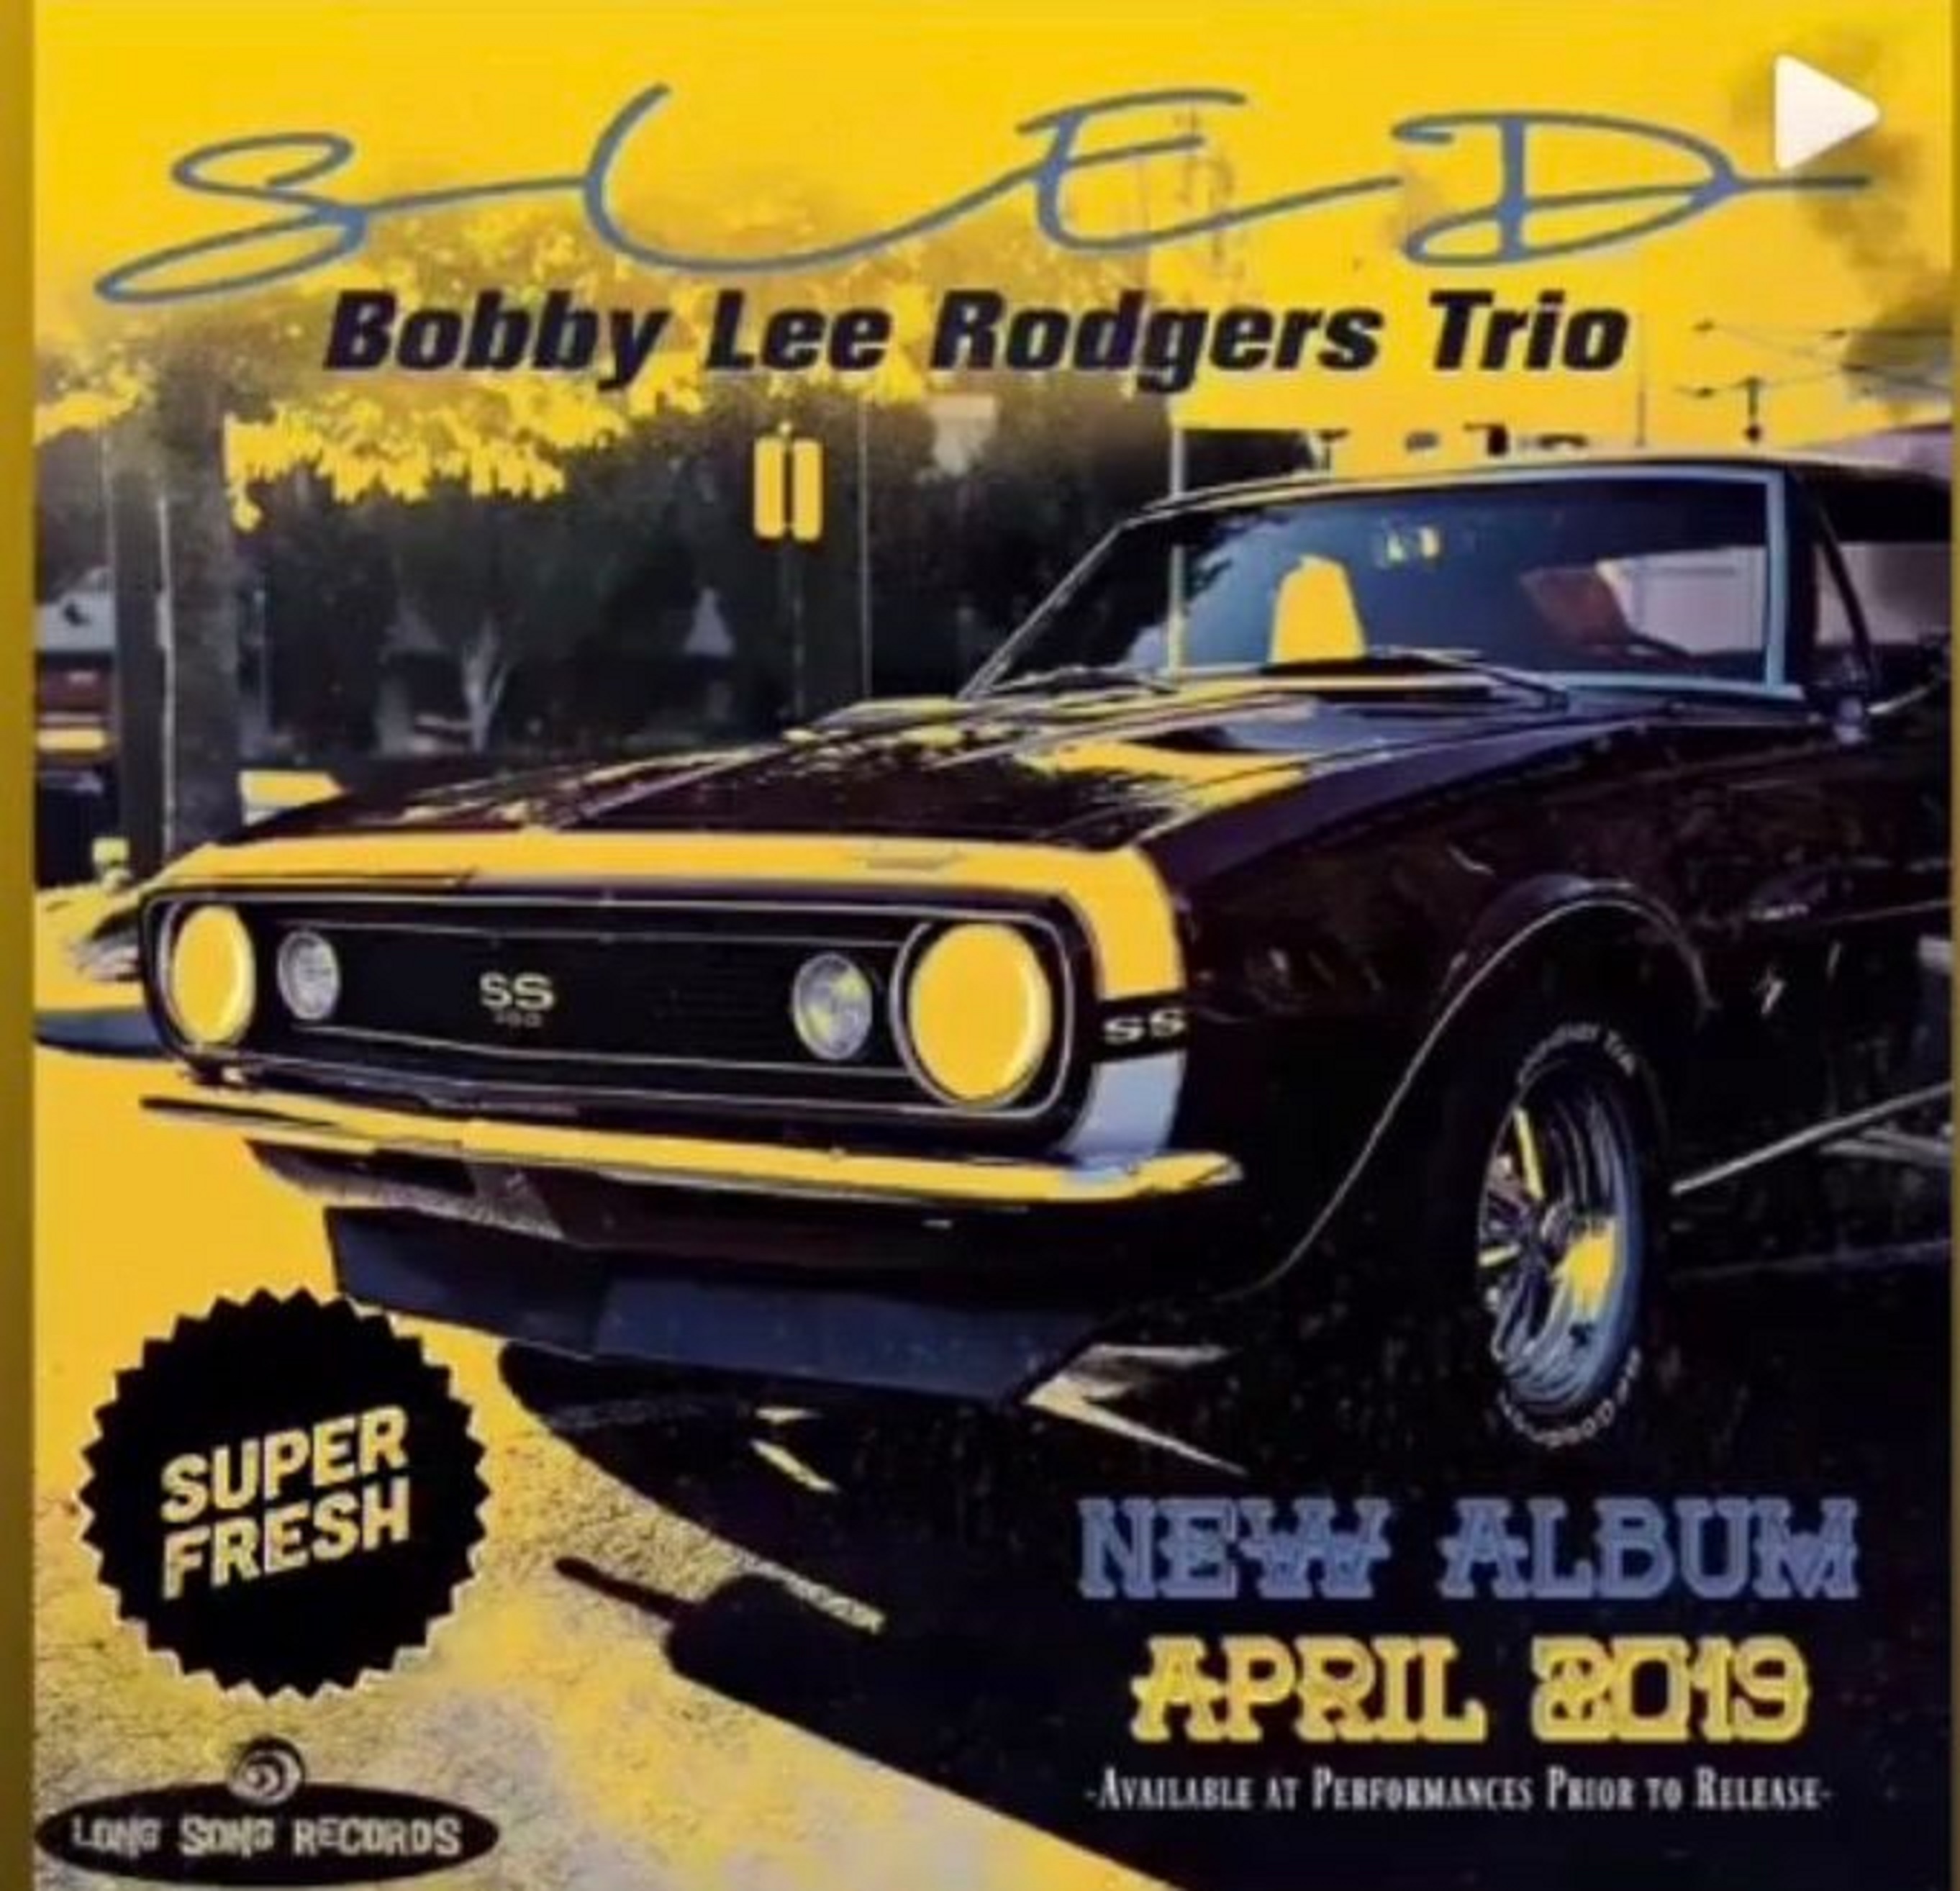 BOBBY LEE RODGERS  Releases Exciting New Album SLED on 4/23